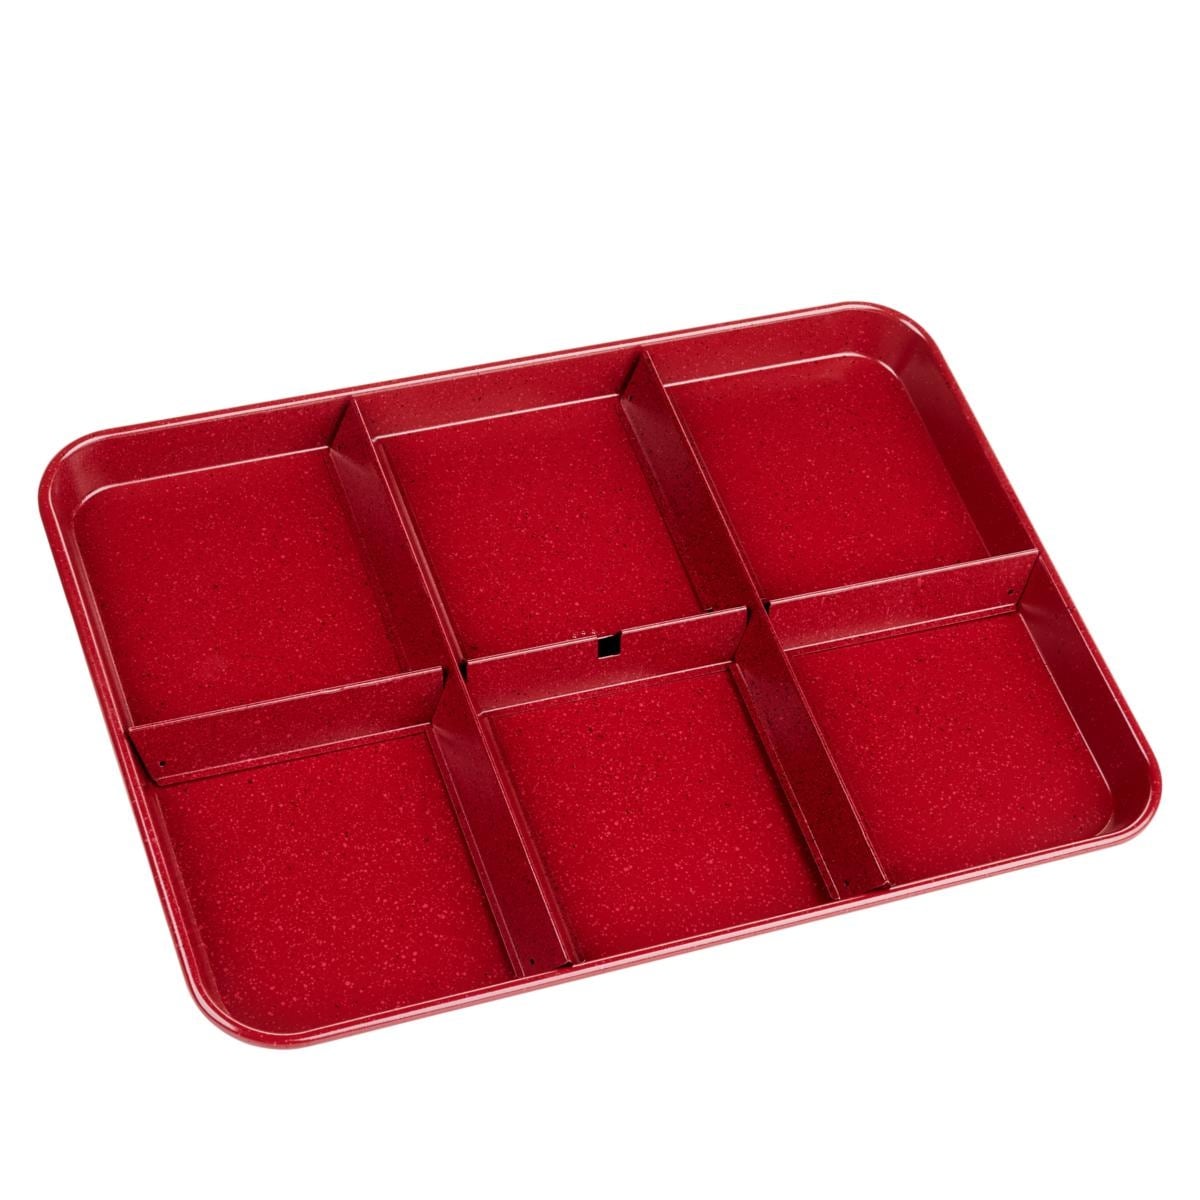 https://ak1.ostkcdn.com/images/products/is/images/direct/b7f09e0c26e893efb65c2ee6156827bdcb16ce54/Curtis-Stone-Dura-Bake-Divided-Sheet-Pan-Set-Model-720-525.jpg